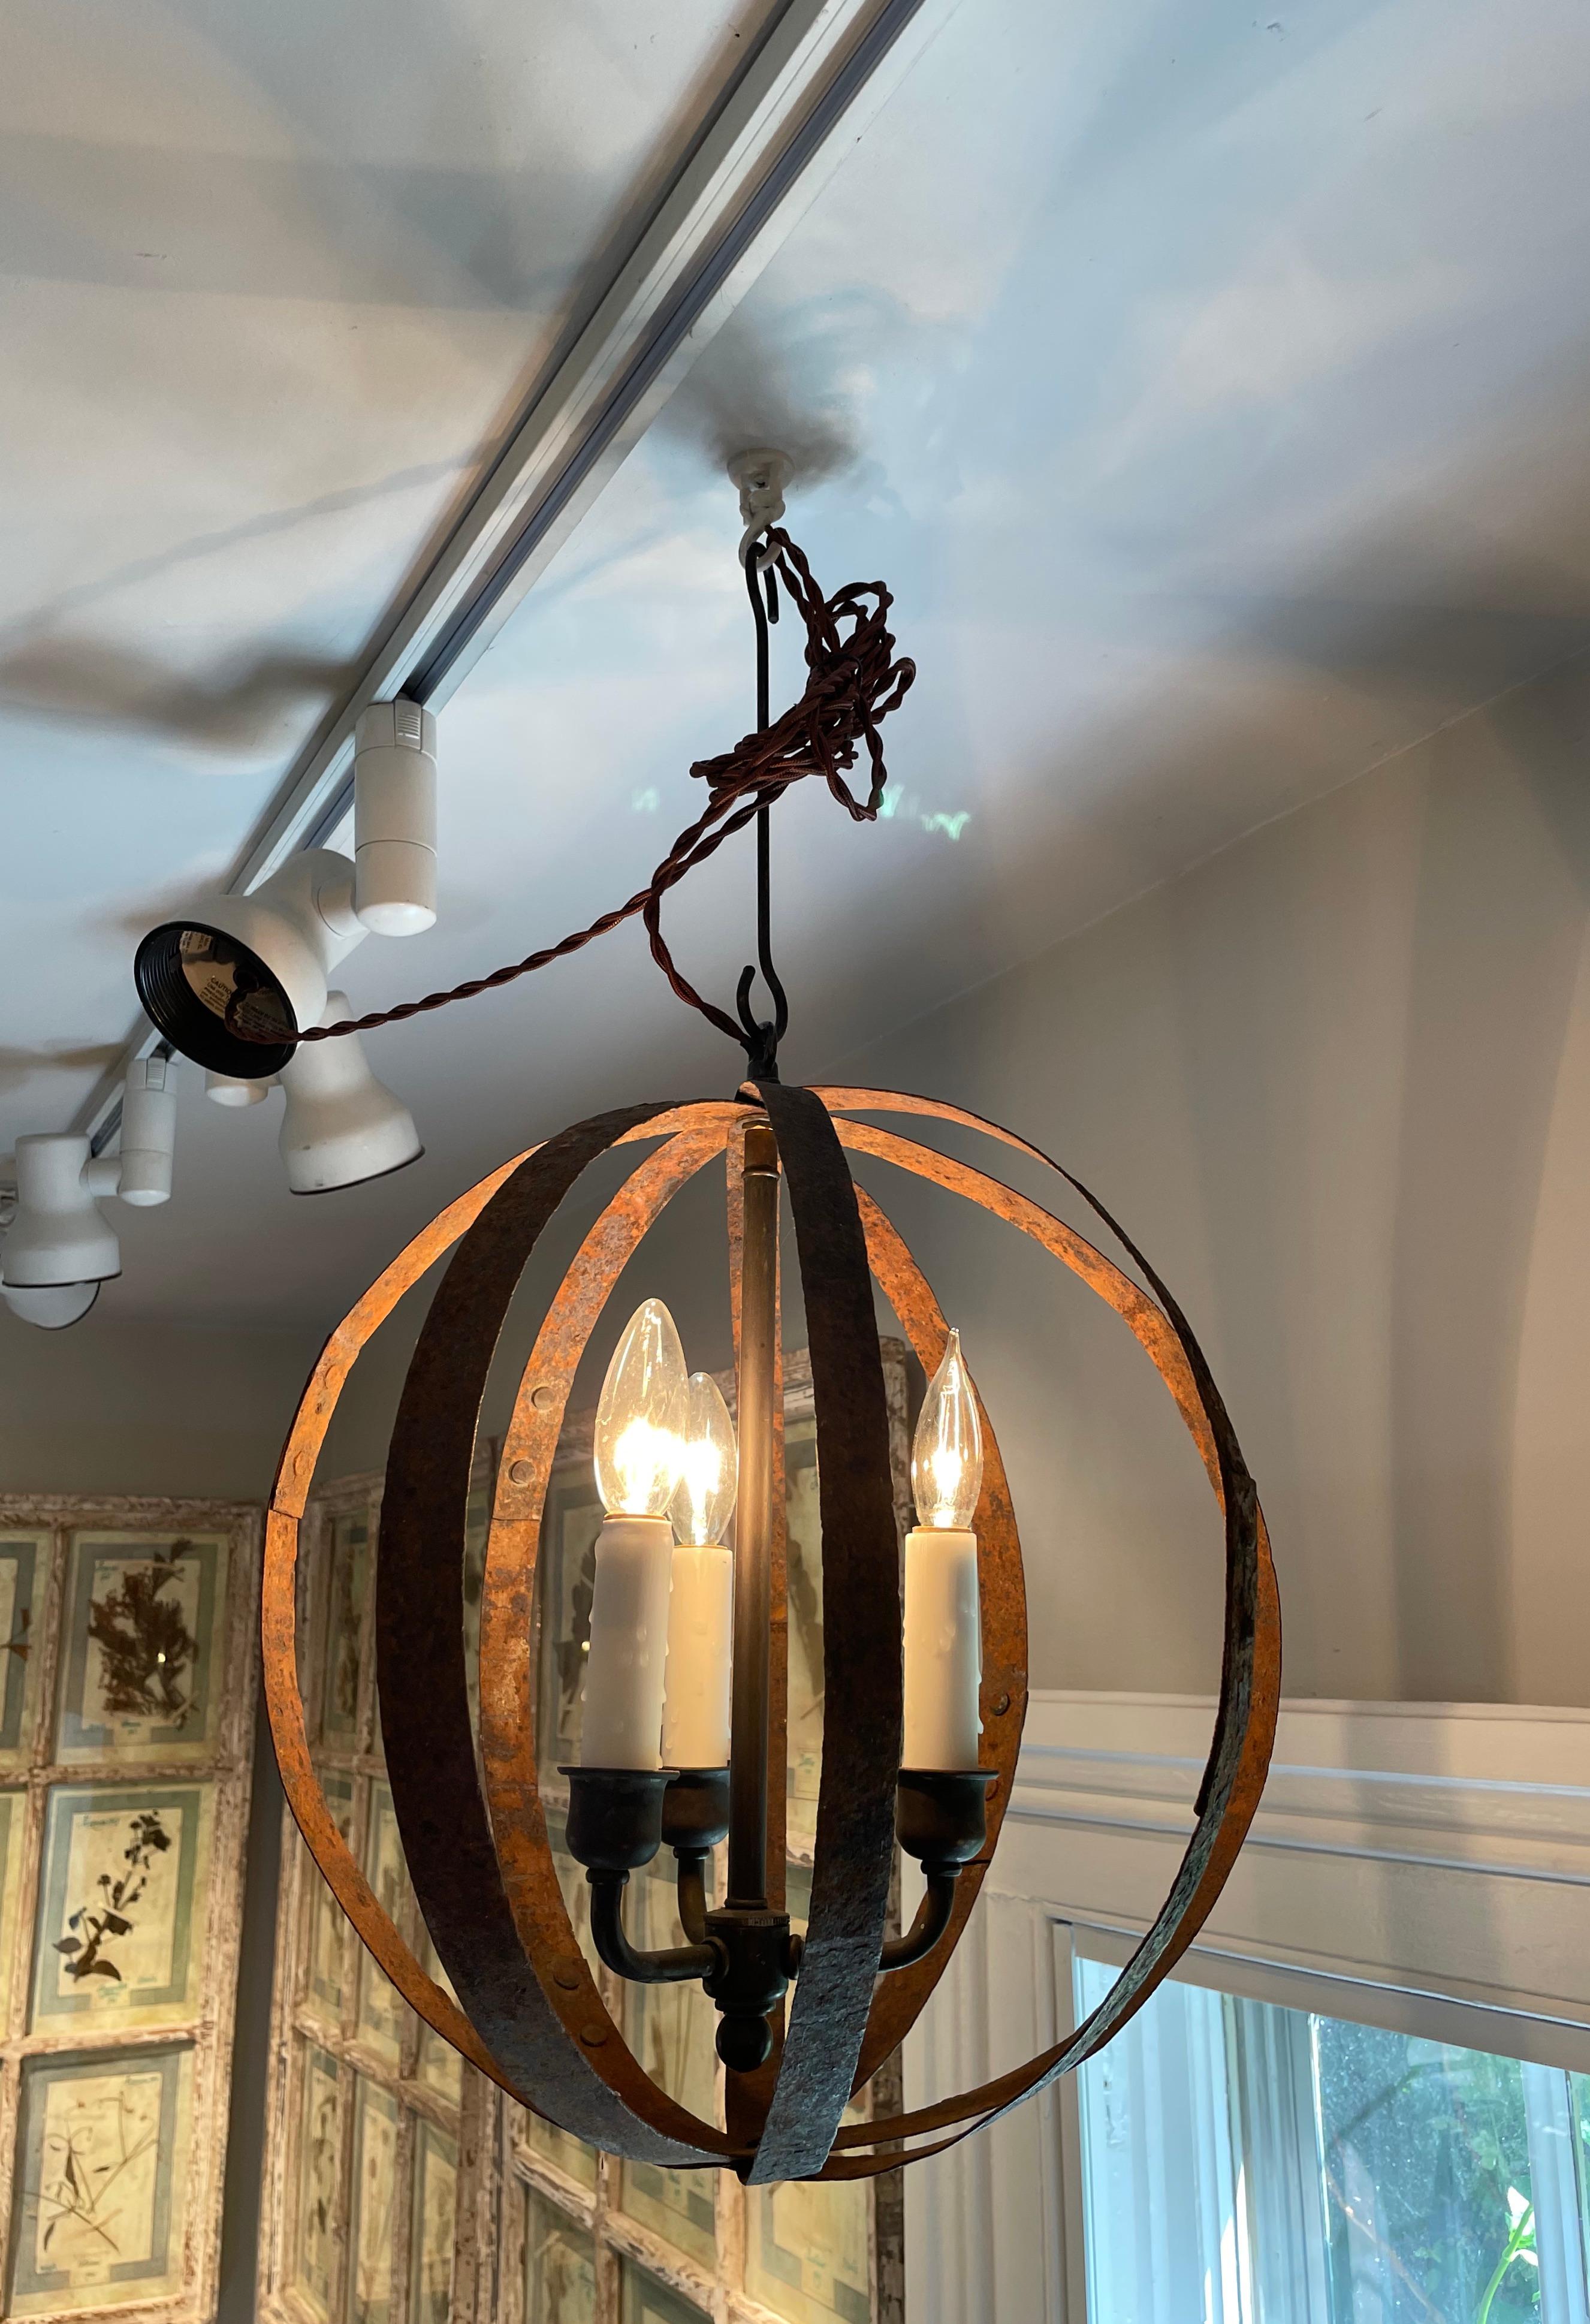 19th C French Wrought Iron Spherical Chandelier #1 1